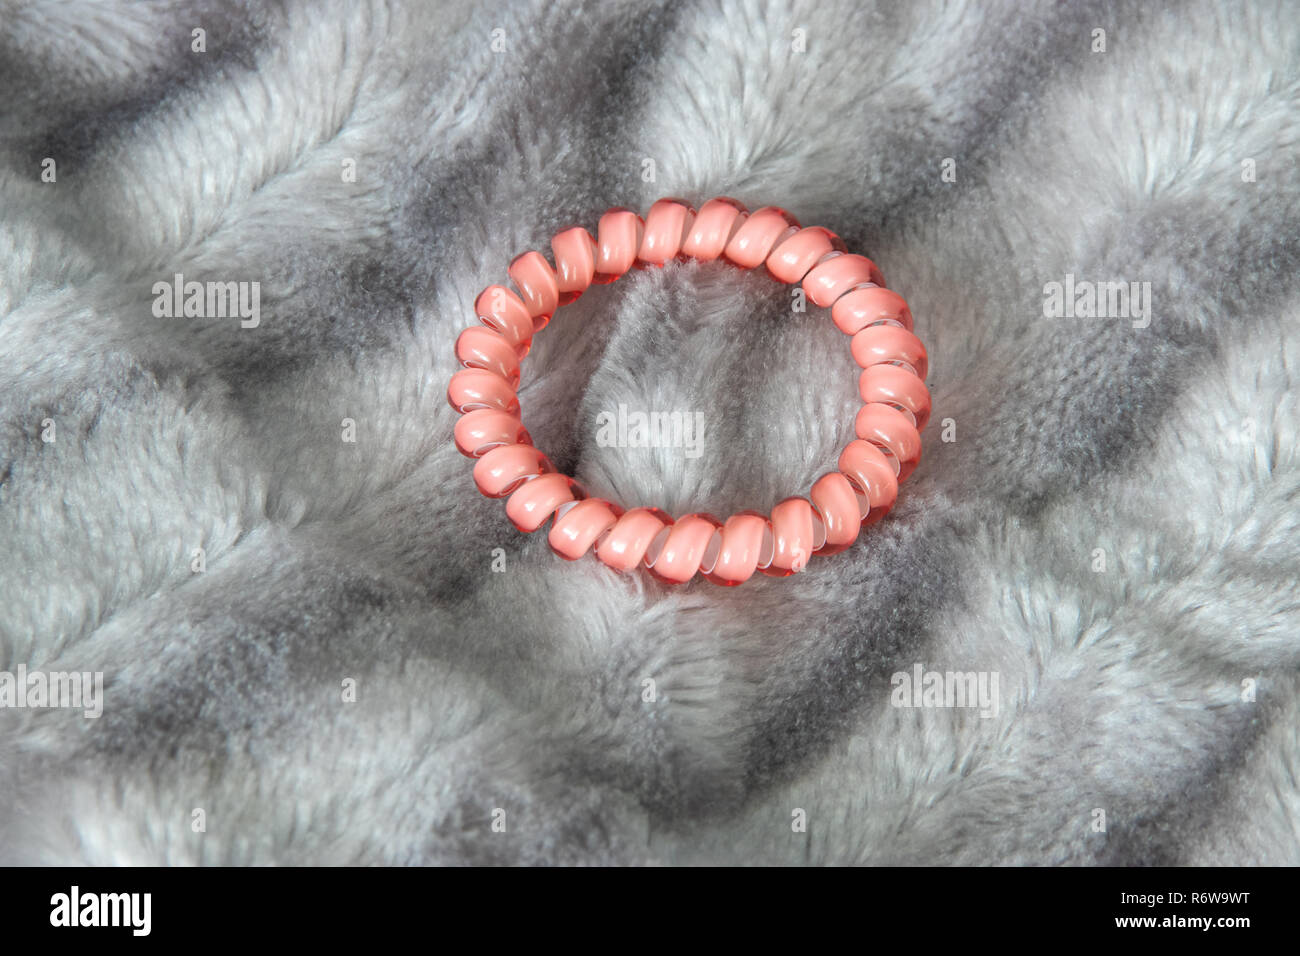 One pink scrunchy hair tie elastic spring on the silver gray fluffy faux fur blanket background Stock Photo